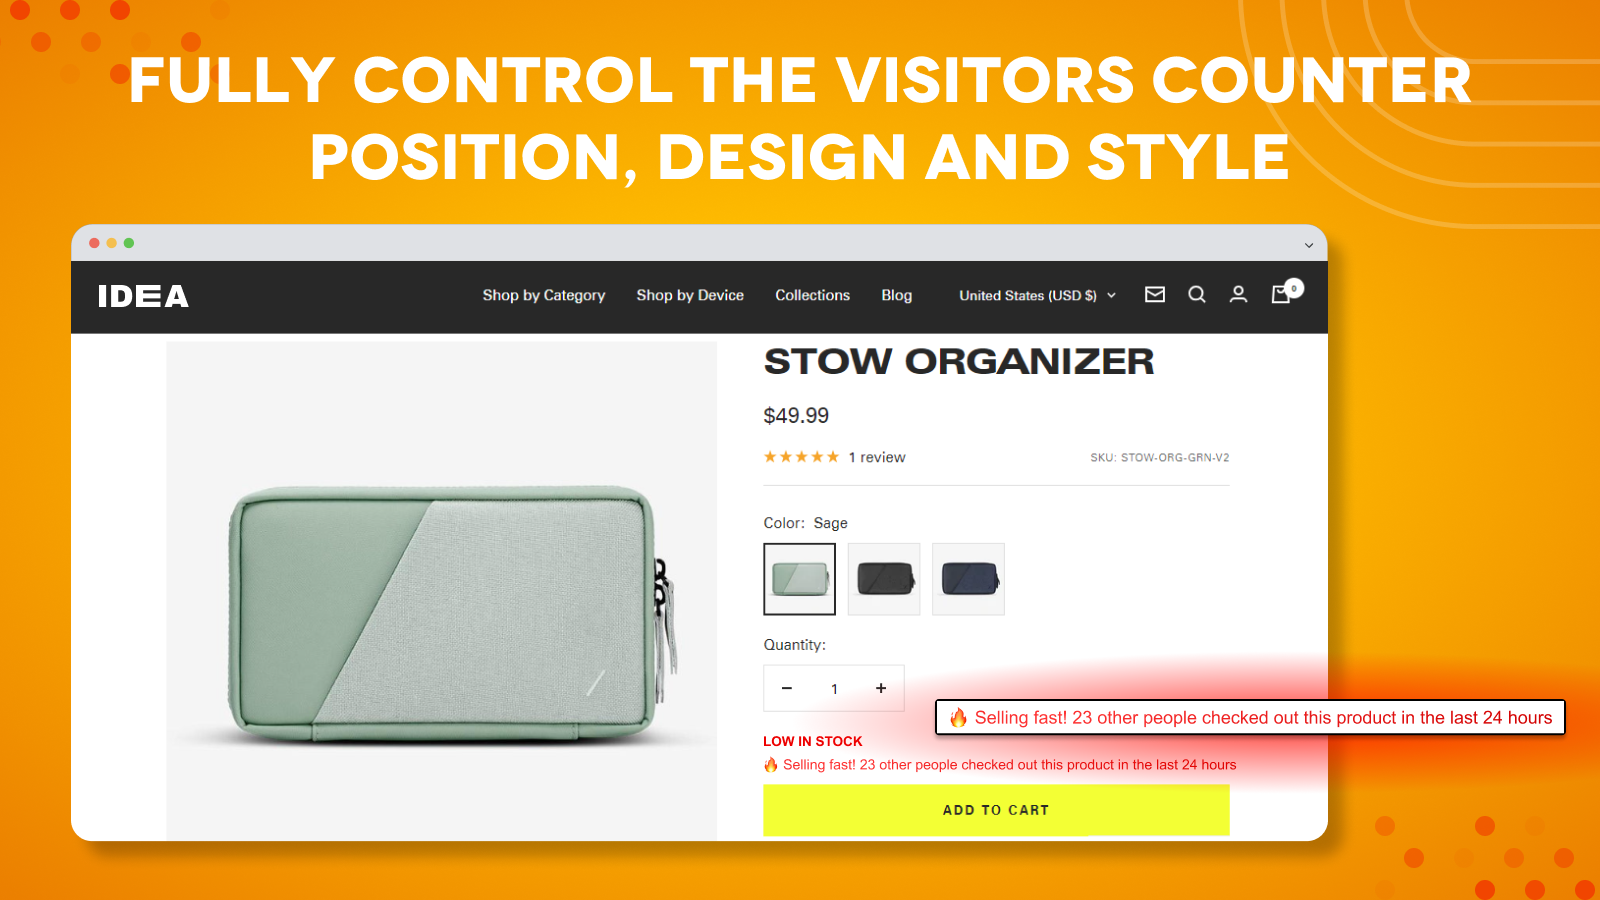 Contador Product Visitors Counter shows live view in a store